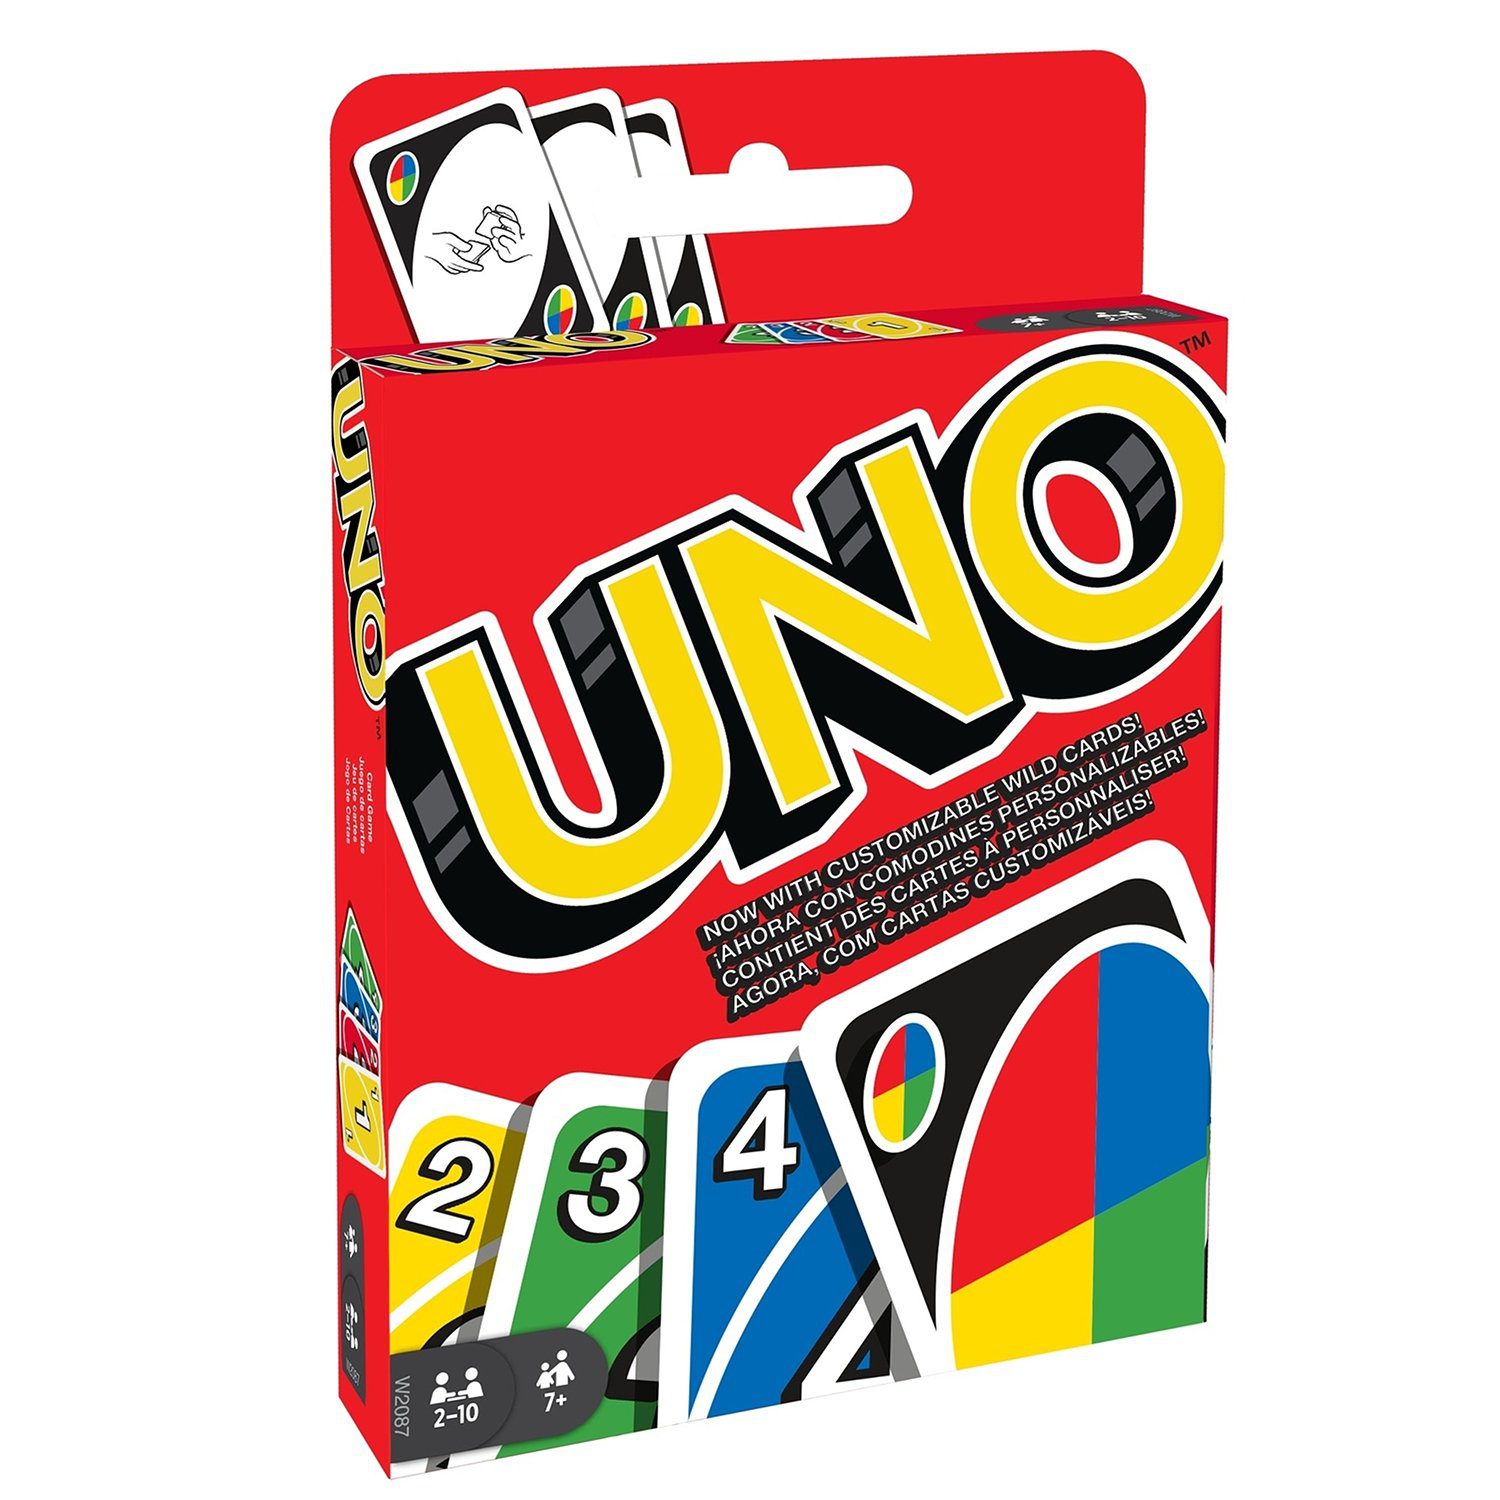 uno game free online